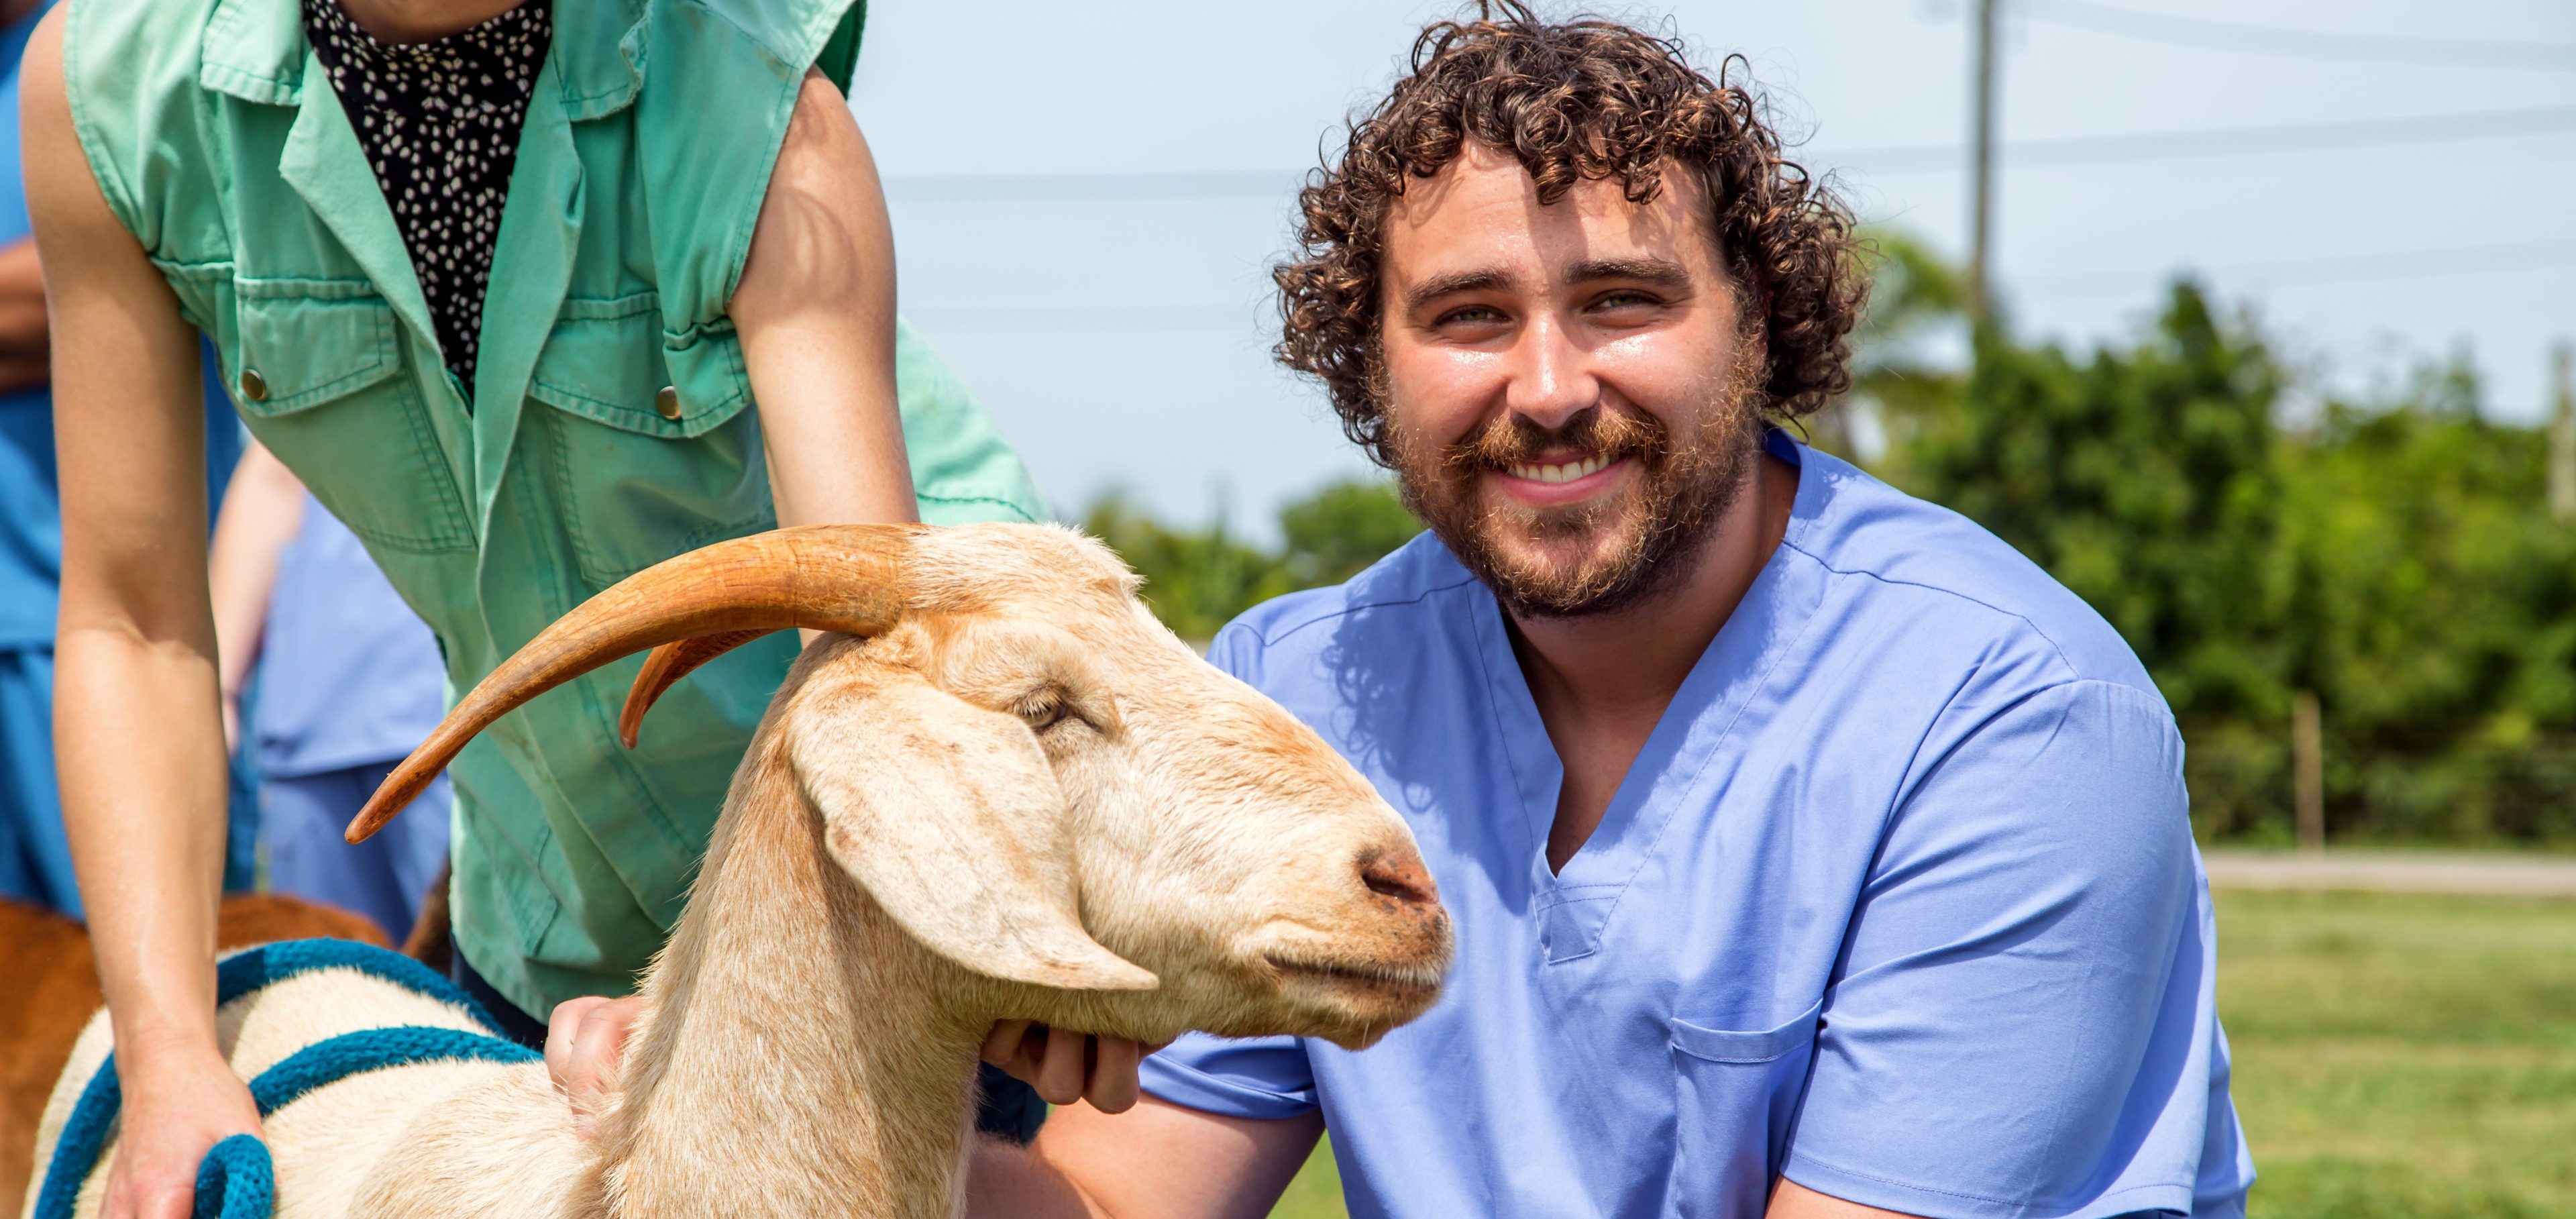 SMU Veterinary student working with goat